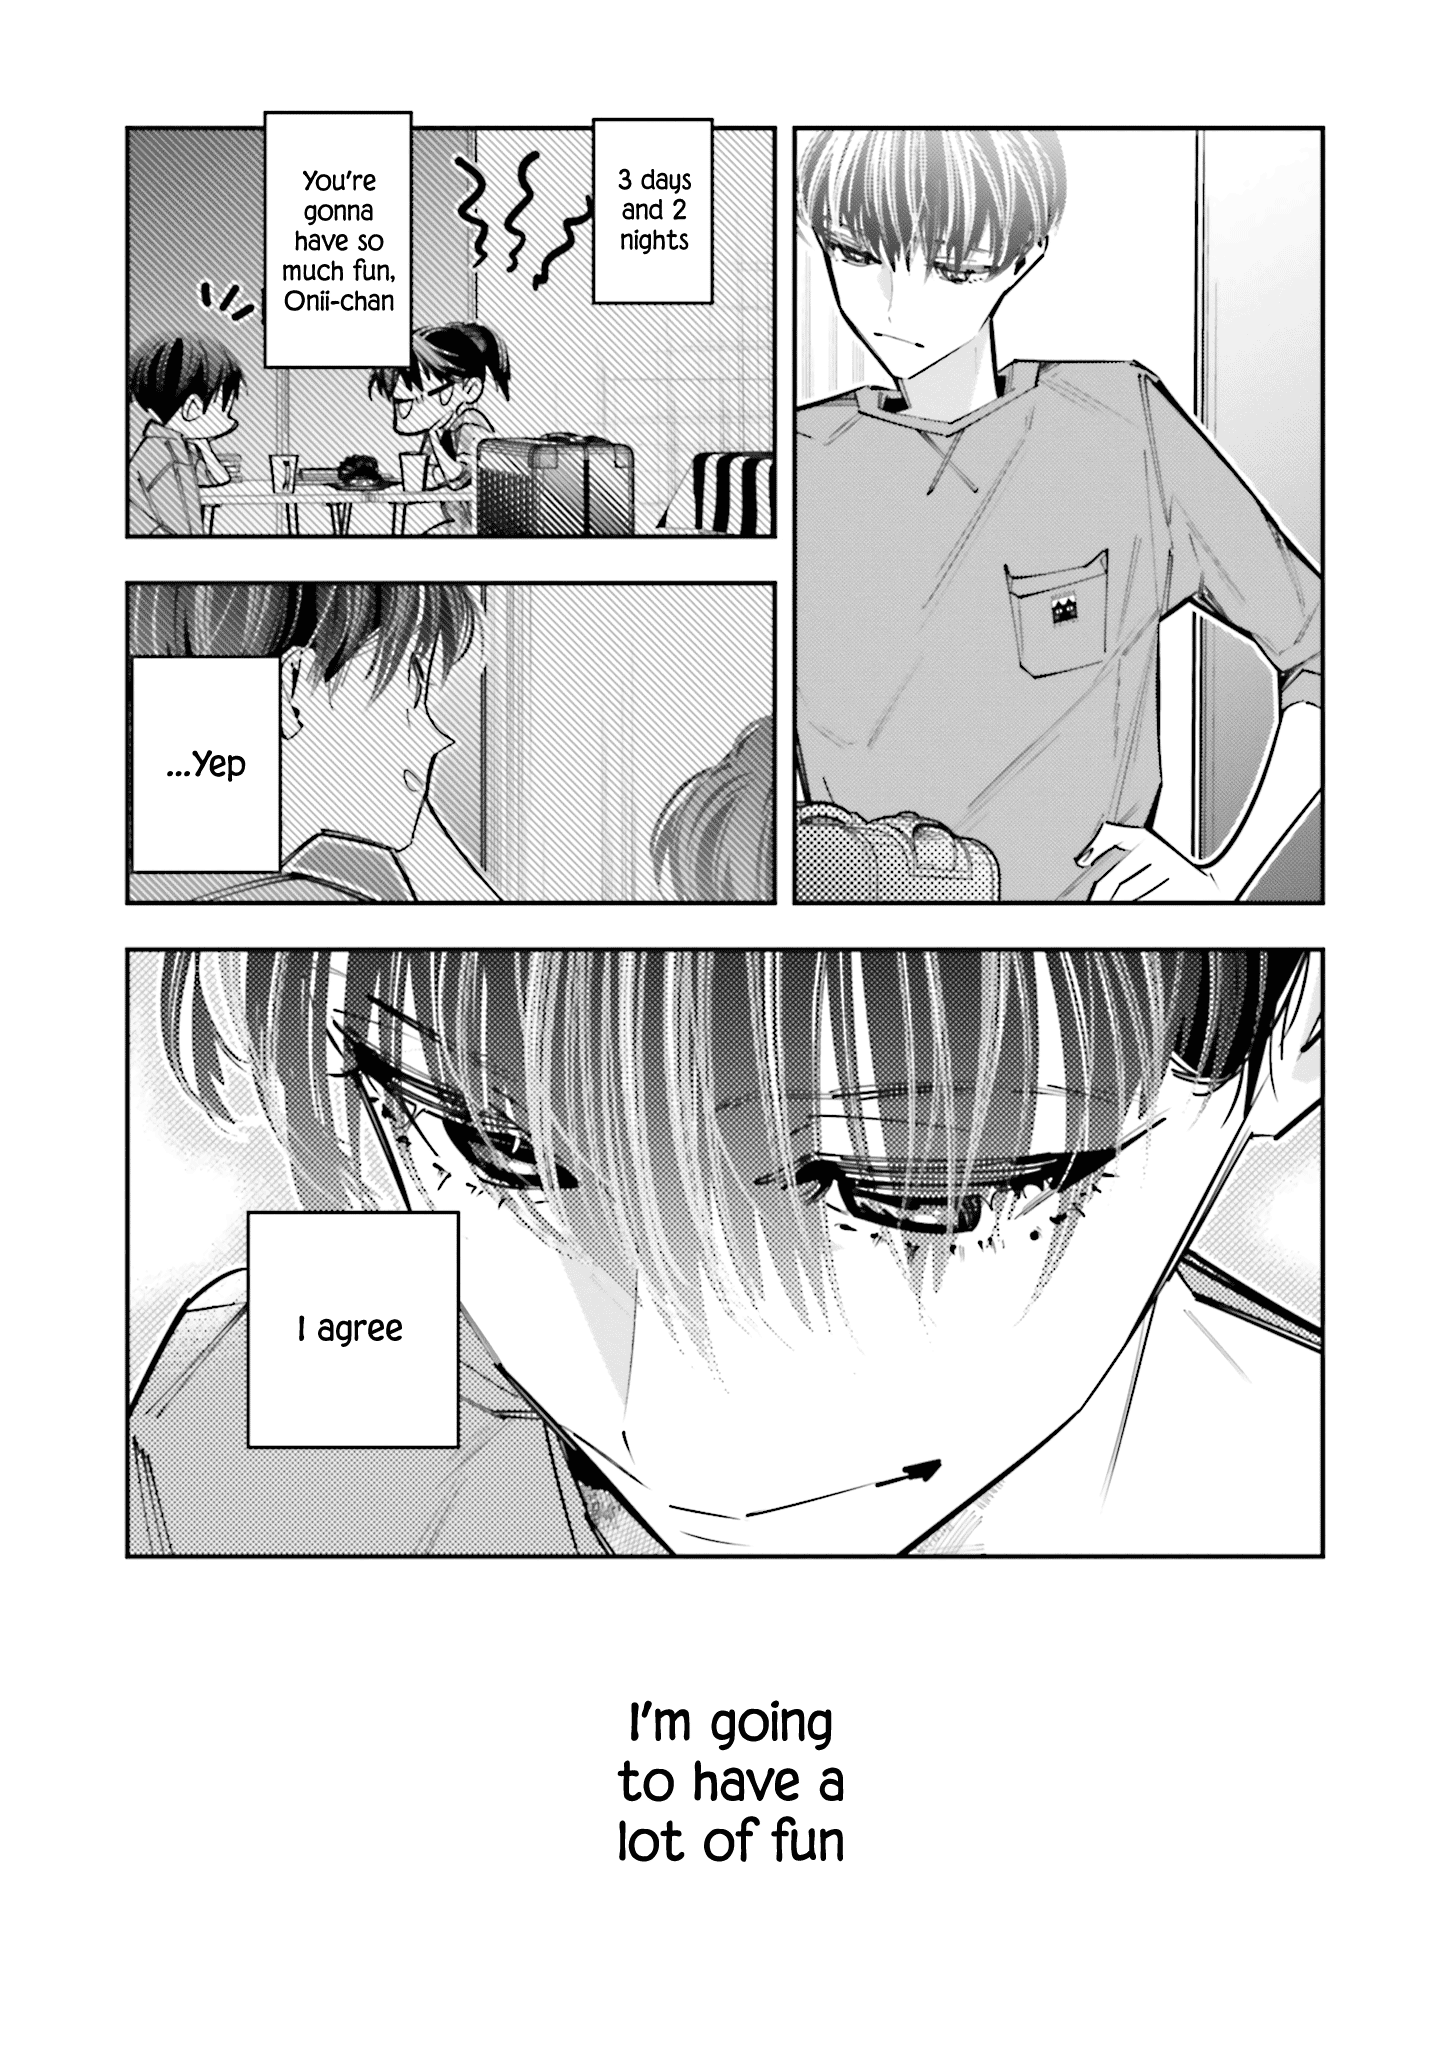 I Reincarnated As The Little Sister Of A Death Game Manga's Murder Mastermind And Failed Chapter 12 #23